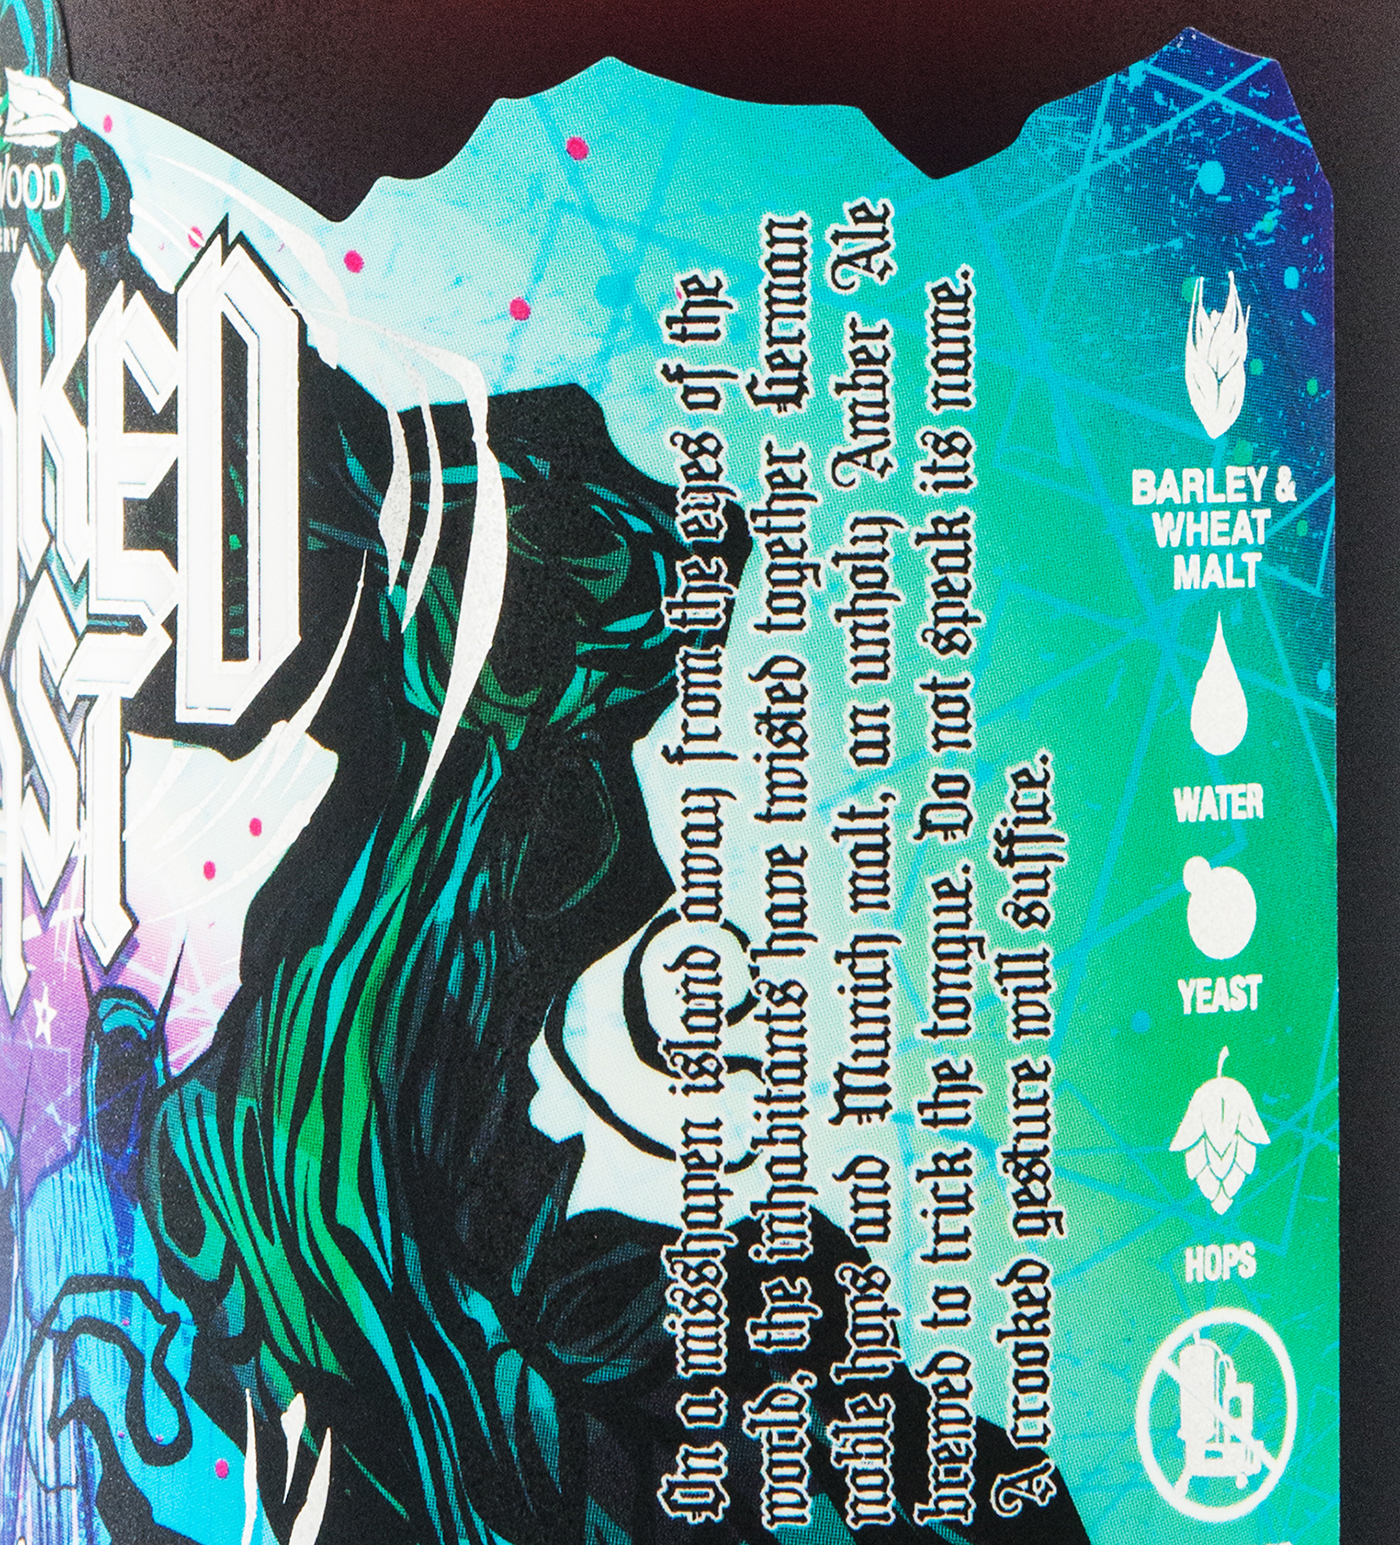 beer craftbeer altbier crooked Coast gnarly beer labels off centre asymmetrical